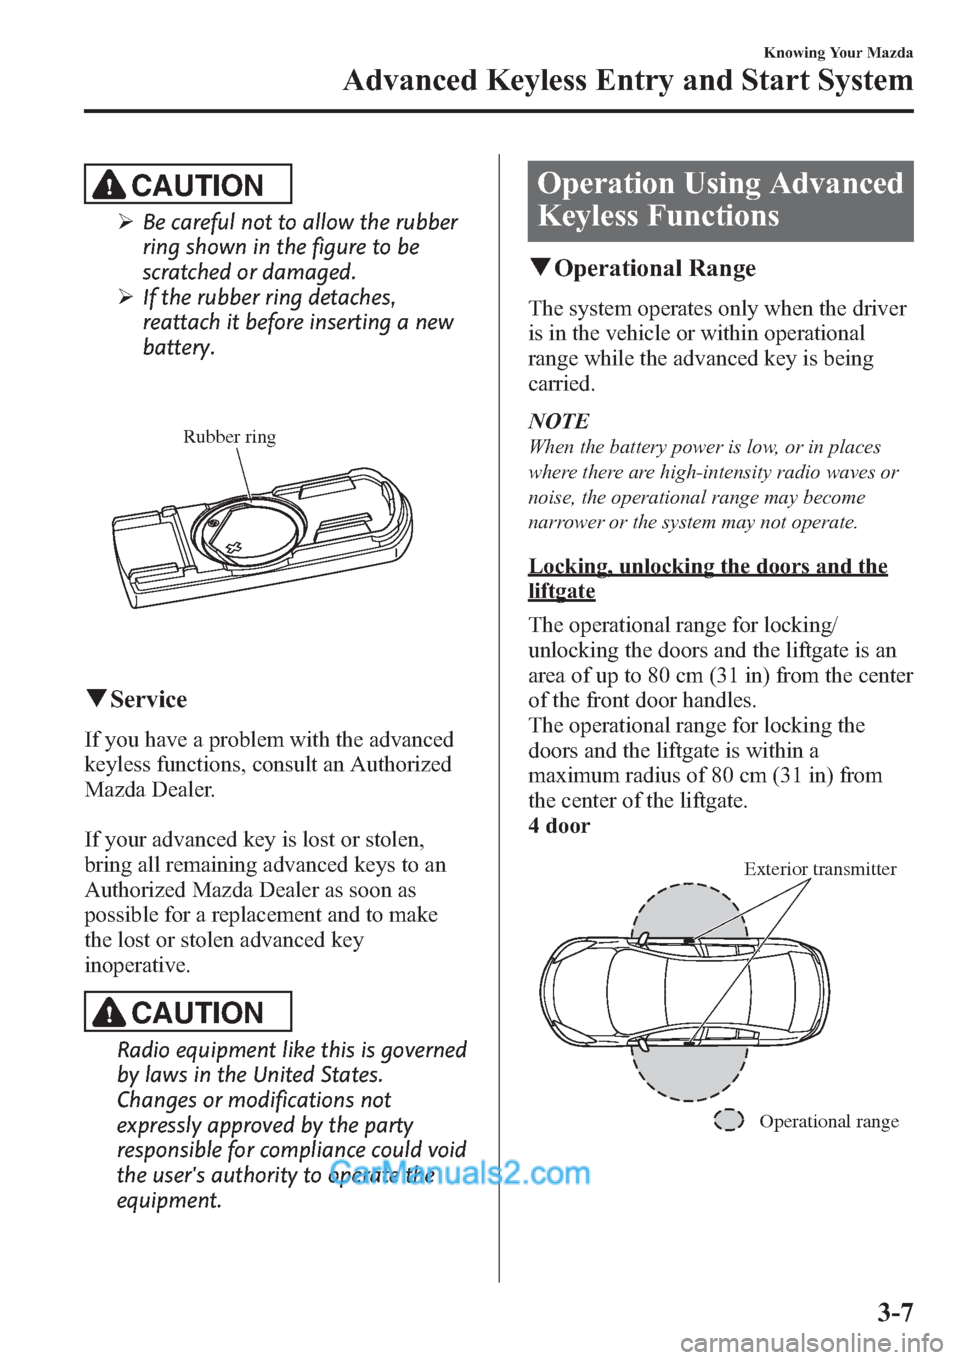 MAZDA MODEL MAZDASPEED 3 2013  Owners Manual (in English) CAUTION
ØBe careful not to allow the rubber
ring shown in the figure to be
scratched or damaged.
ØIf the rubber ring detaches,
reattach it before inserting a new
battery.
Rubber ring
qService
If you